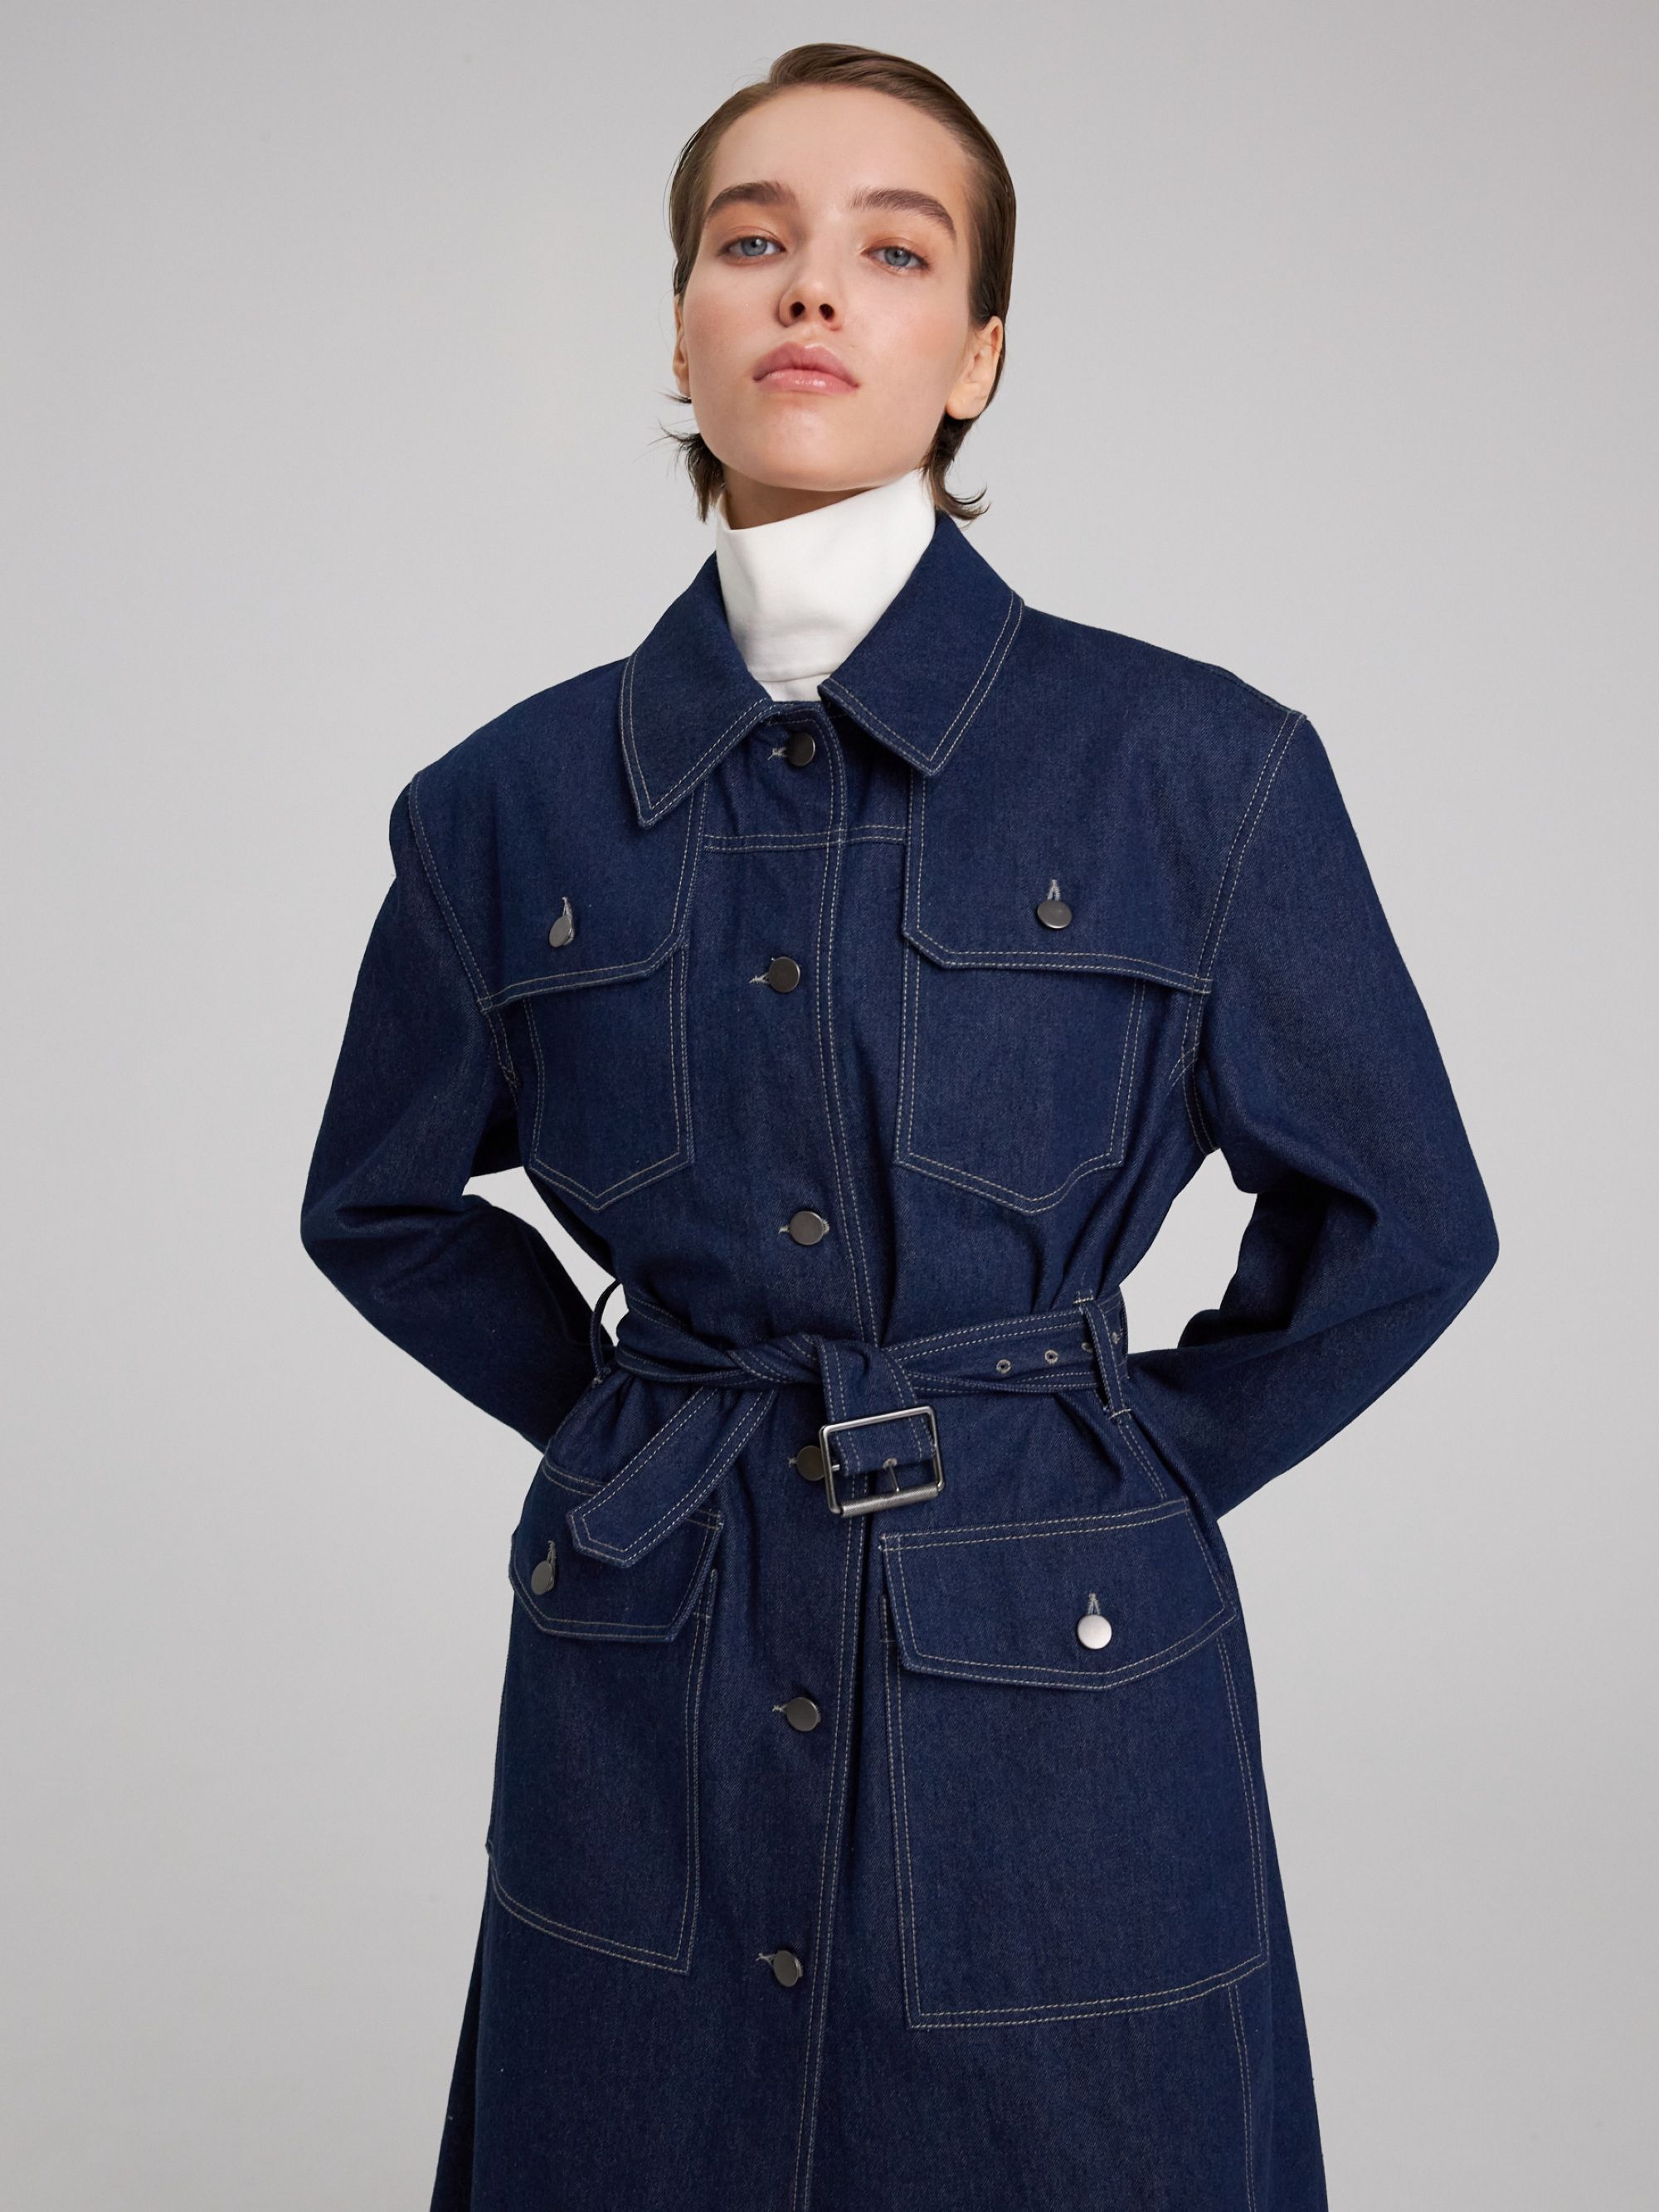 Trench coat, pattern №1011 buy on-line